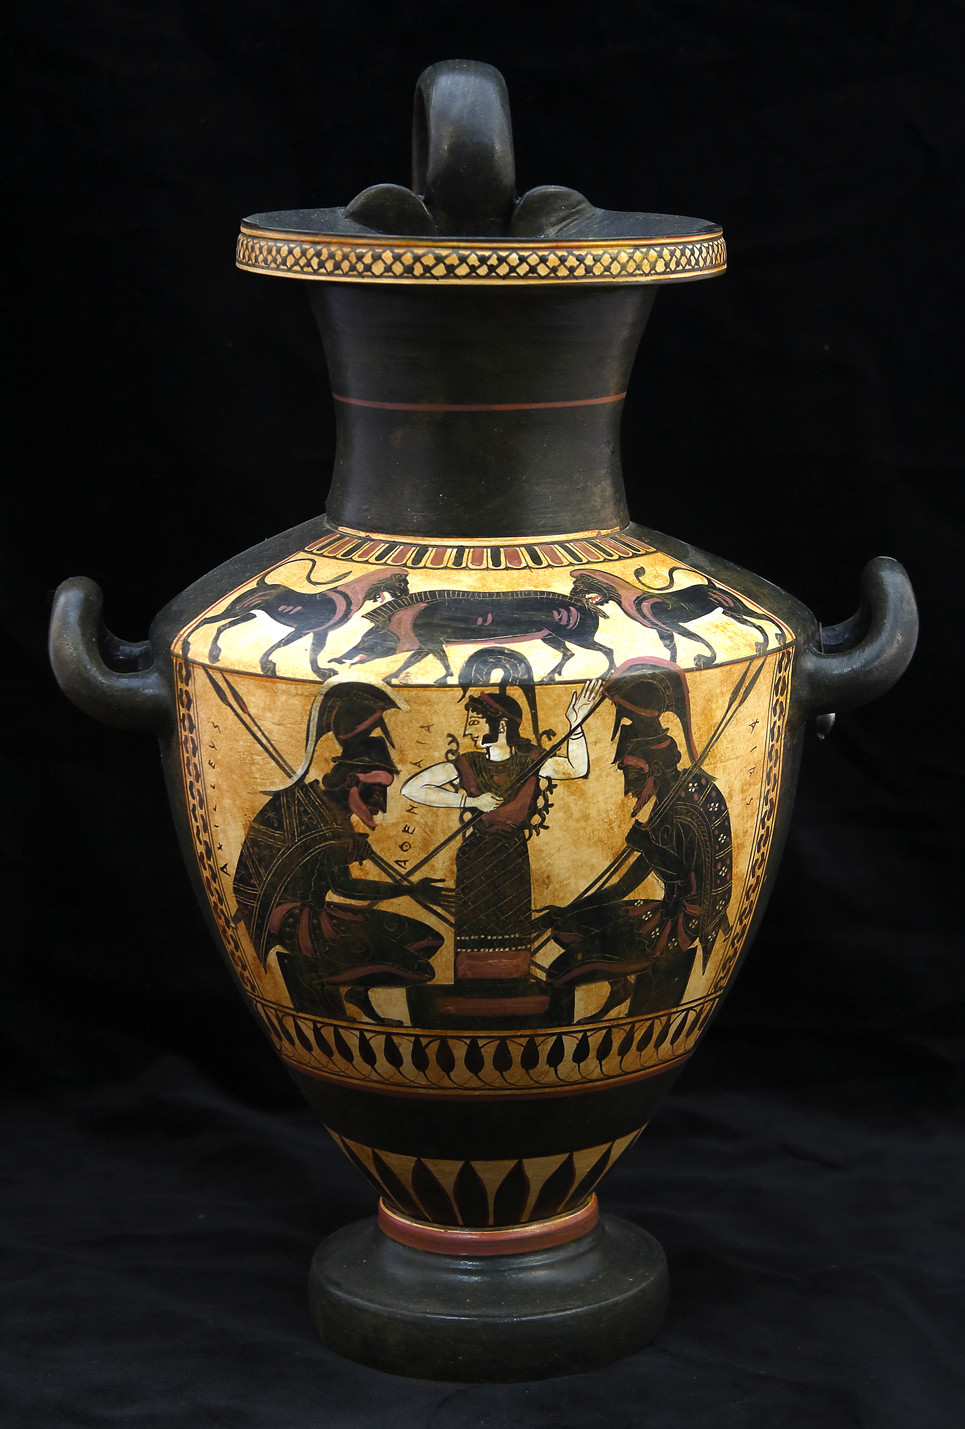 13 Nice Ceramic Urn Vase 2024 free download ceramic urn vase of greek pottery shop buy ancient greek vessels replicas ceramic vases regarding greek pottery shop black figured hydria with achilleas and ajax playing zatrikion and the go